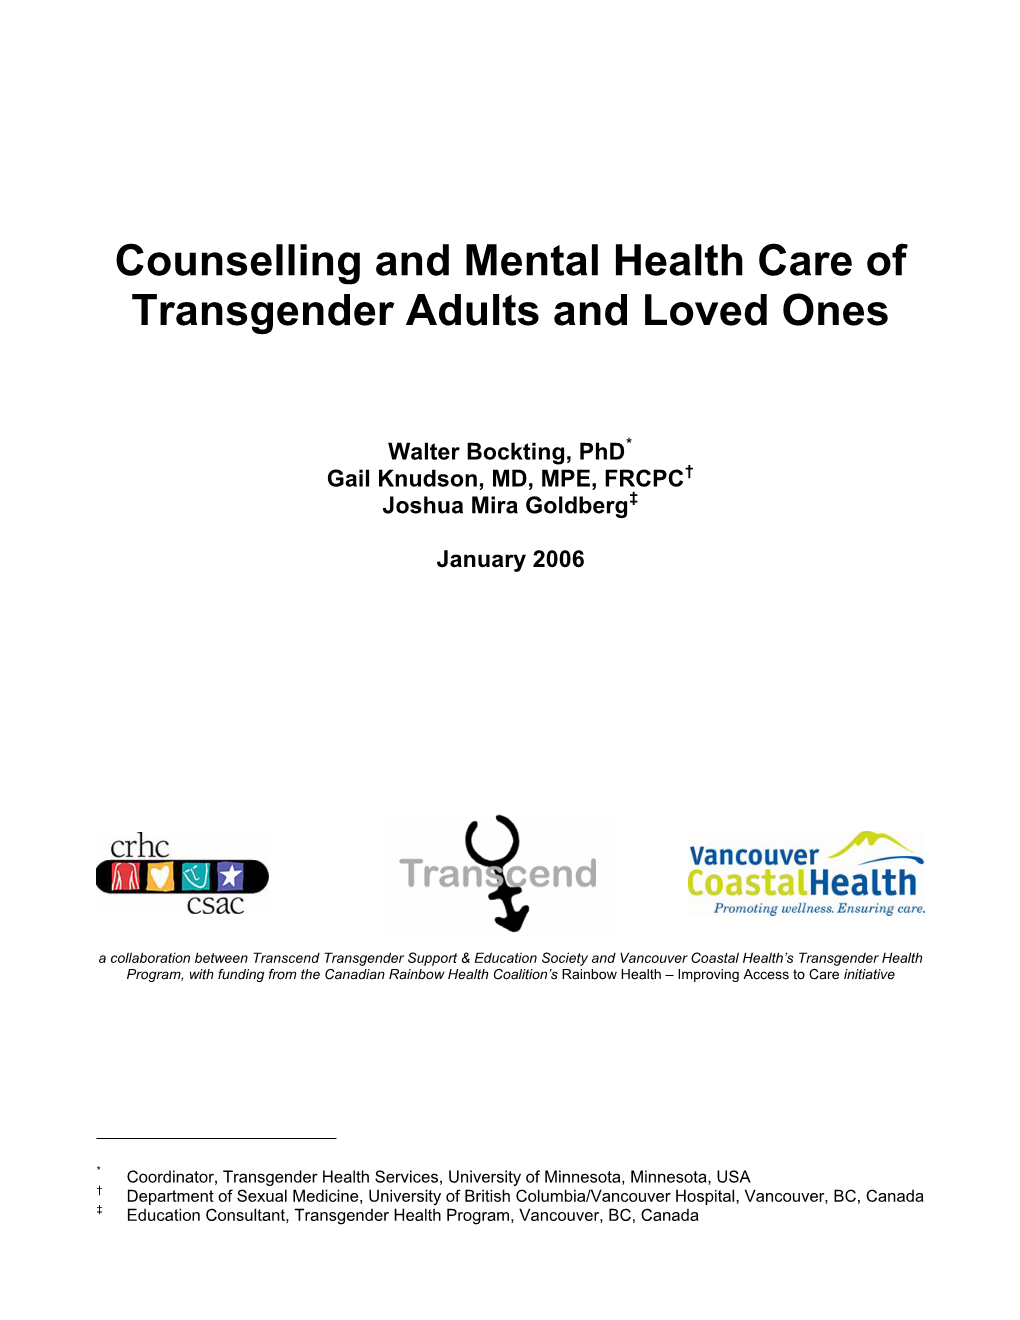 Counselling and Mental Health Care of Transgender Adults and Loved Ones